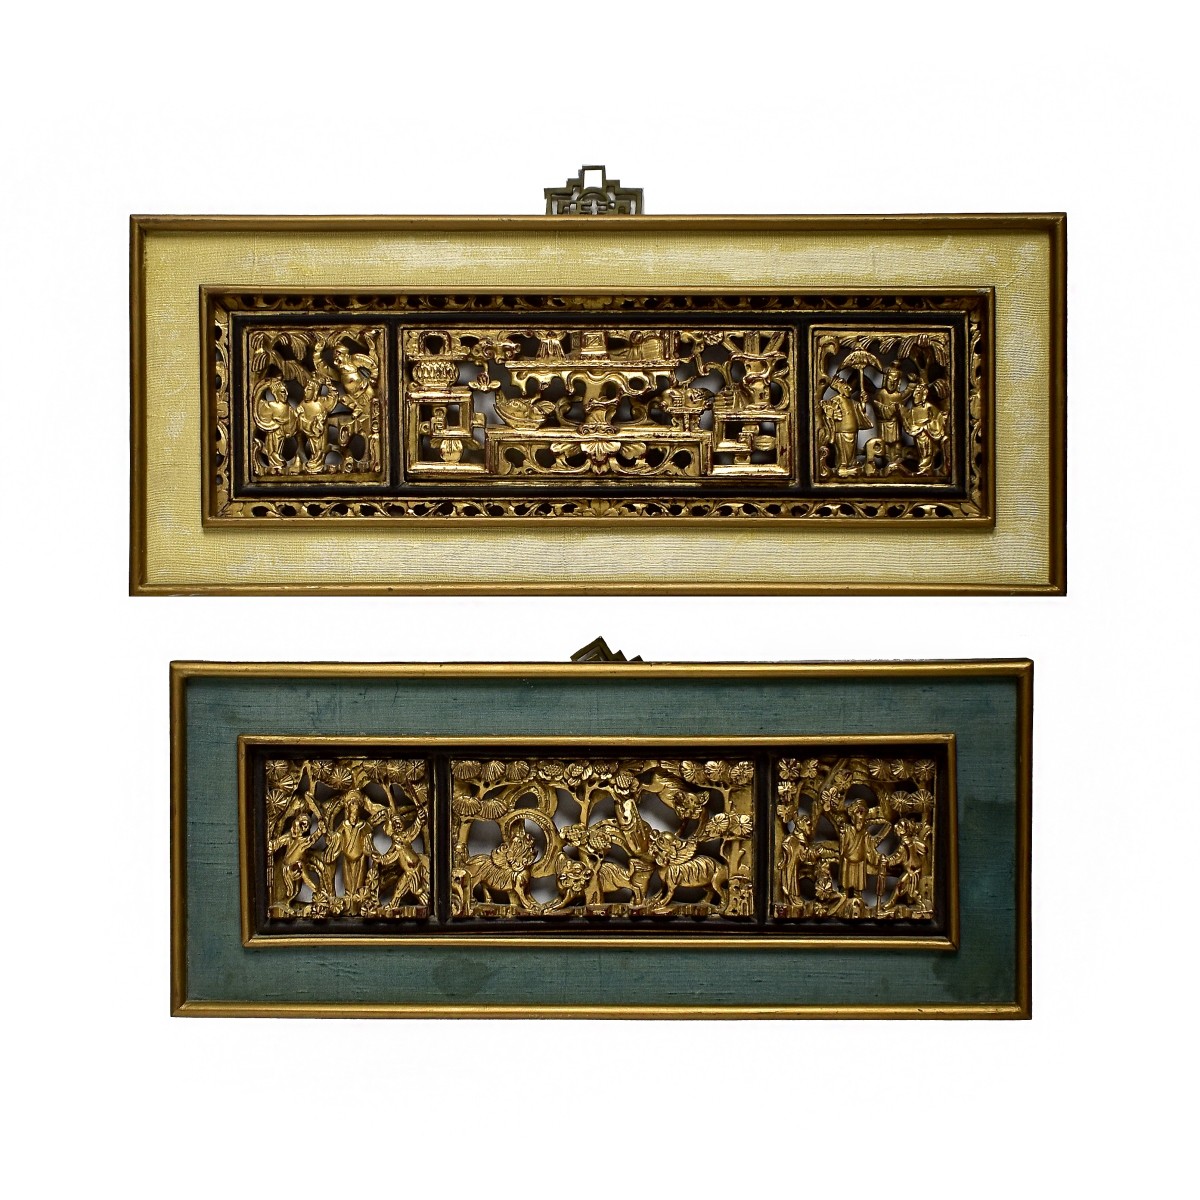 Two Framed Chinese Deep Relief Carved Panels